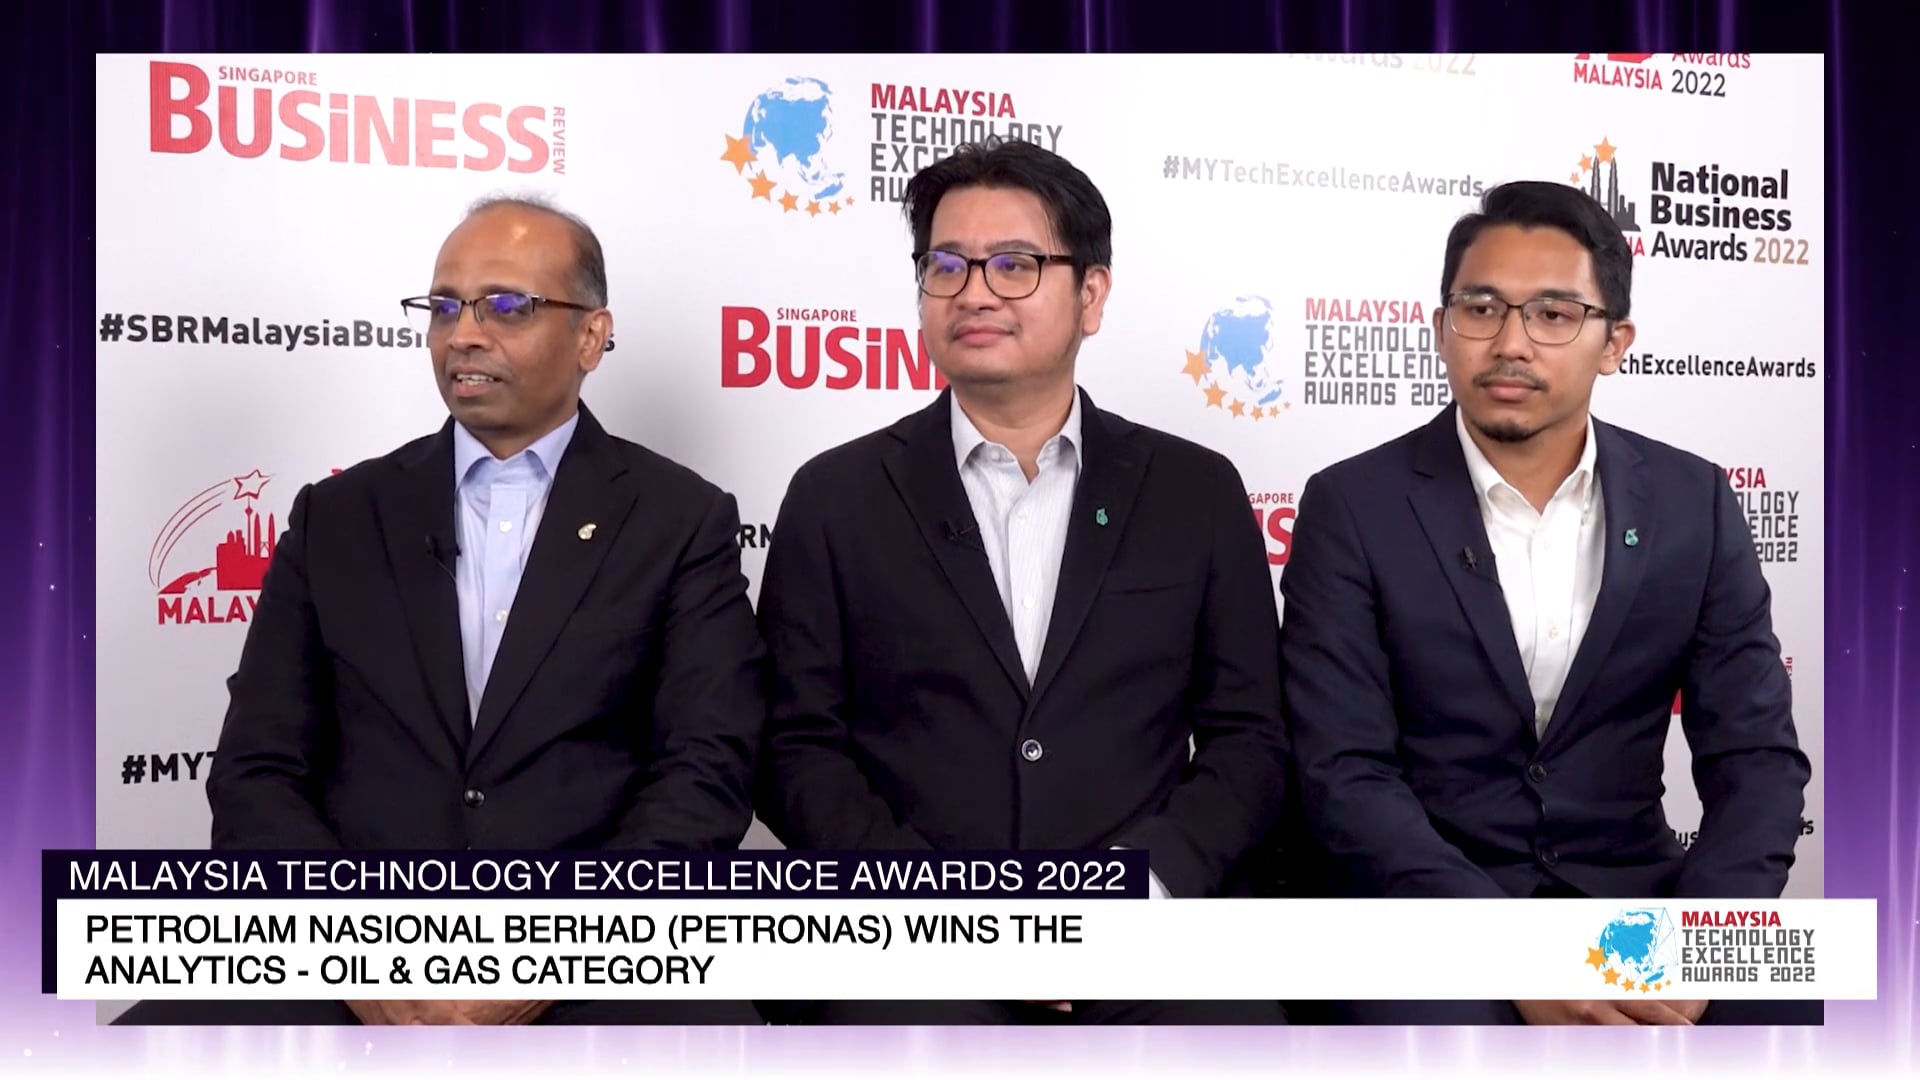 Malaysia Technology Excellence Awards 2022 Winner for Analytics